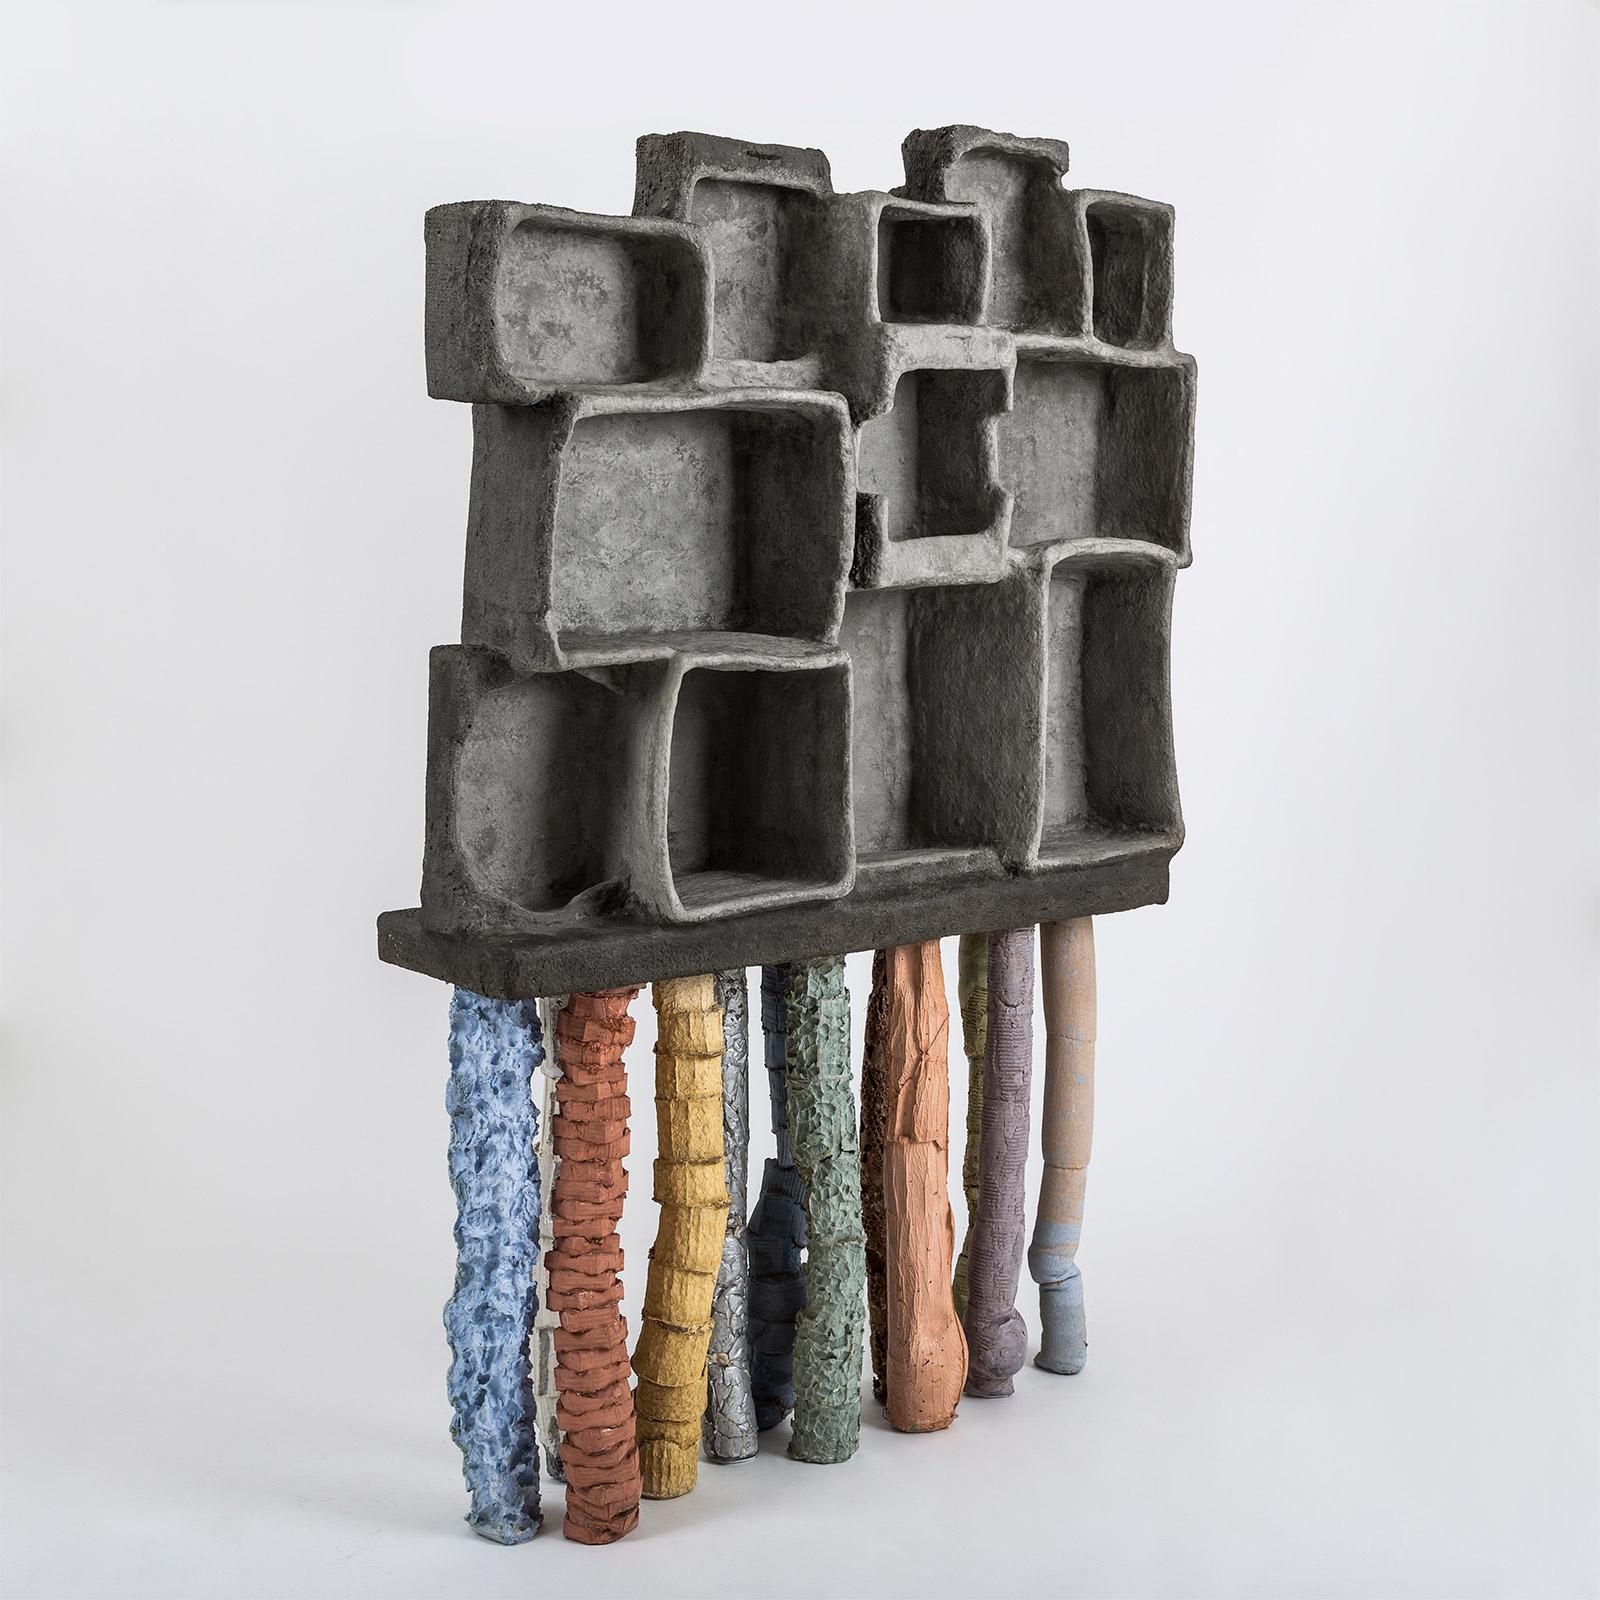 Fossil cabinet is a part of Fossil collection by Nacho Carbonell. As description of Fossil: preserved remains of animals, plants and organism from the remote past, Nacho had been collecting, gather and picking up remains materials from the past